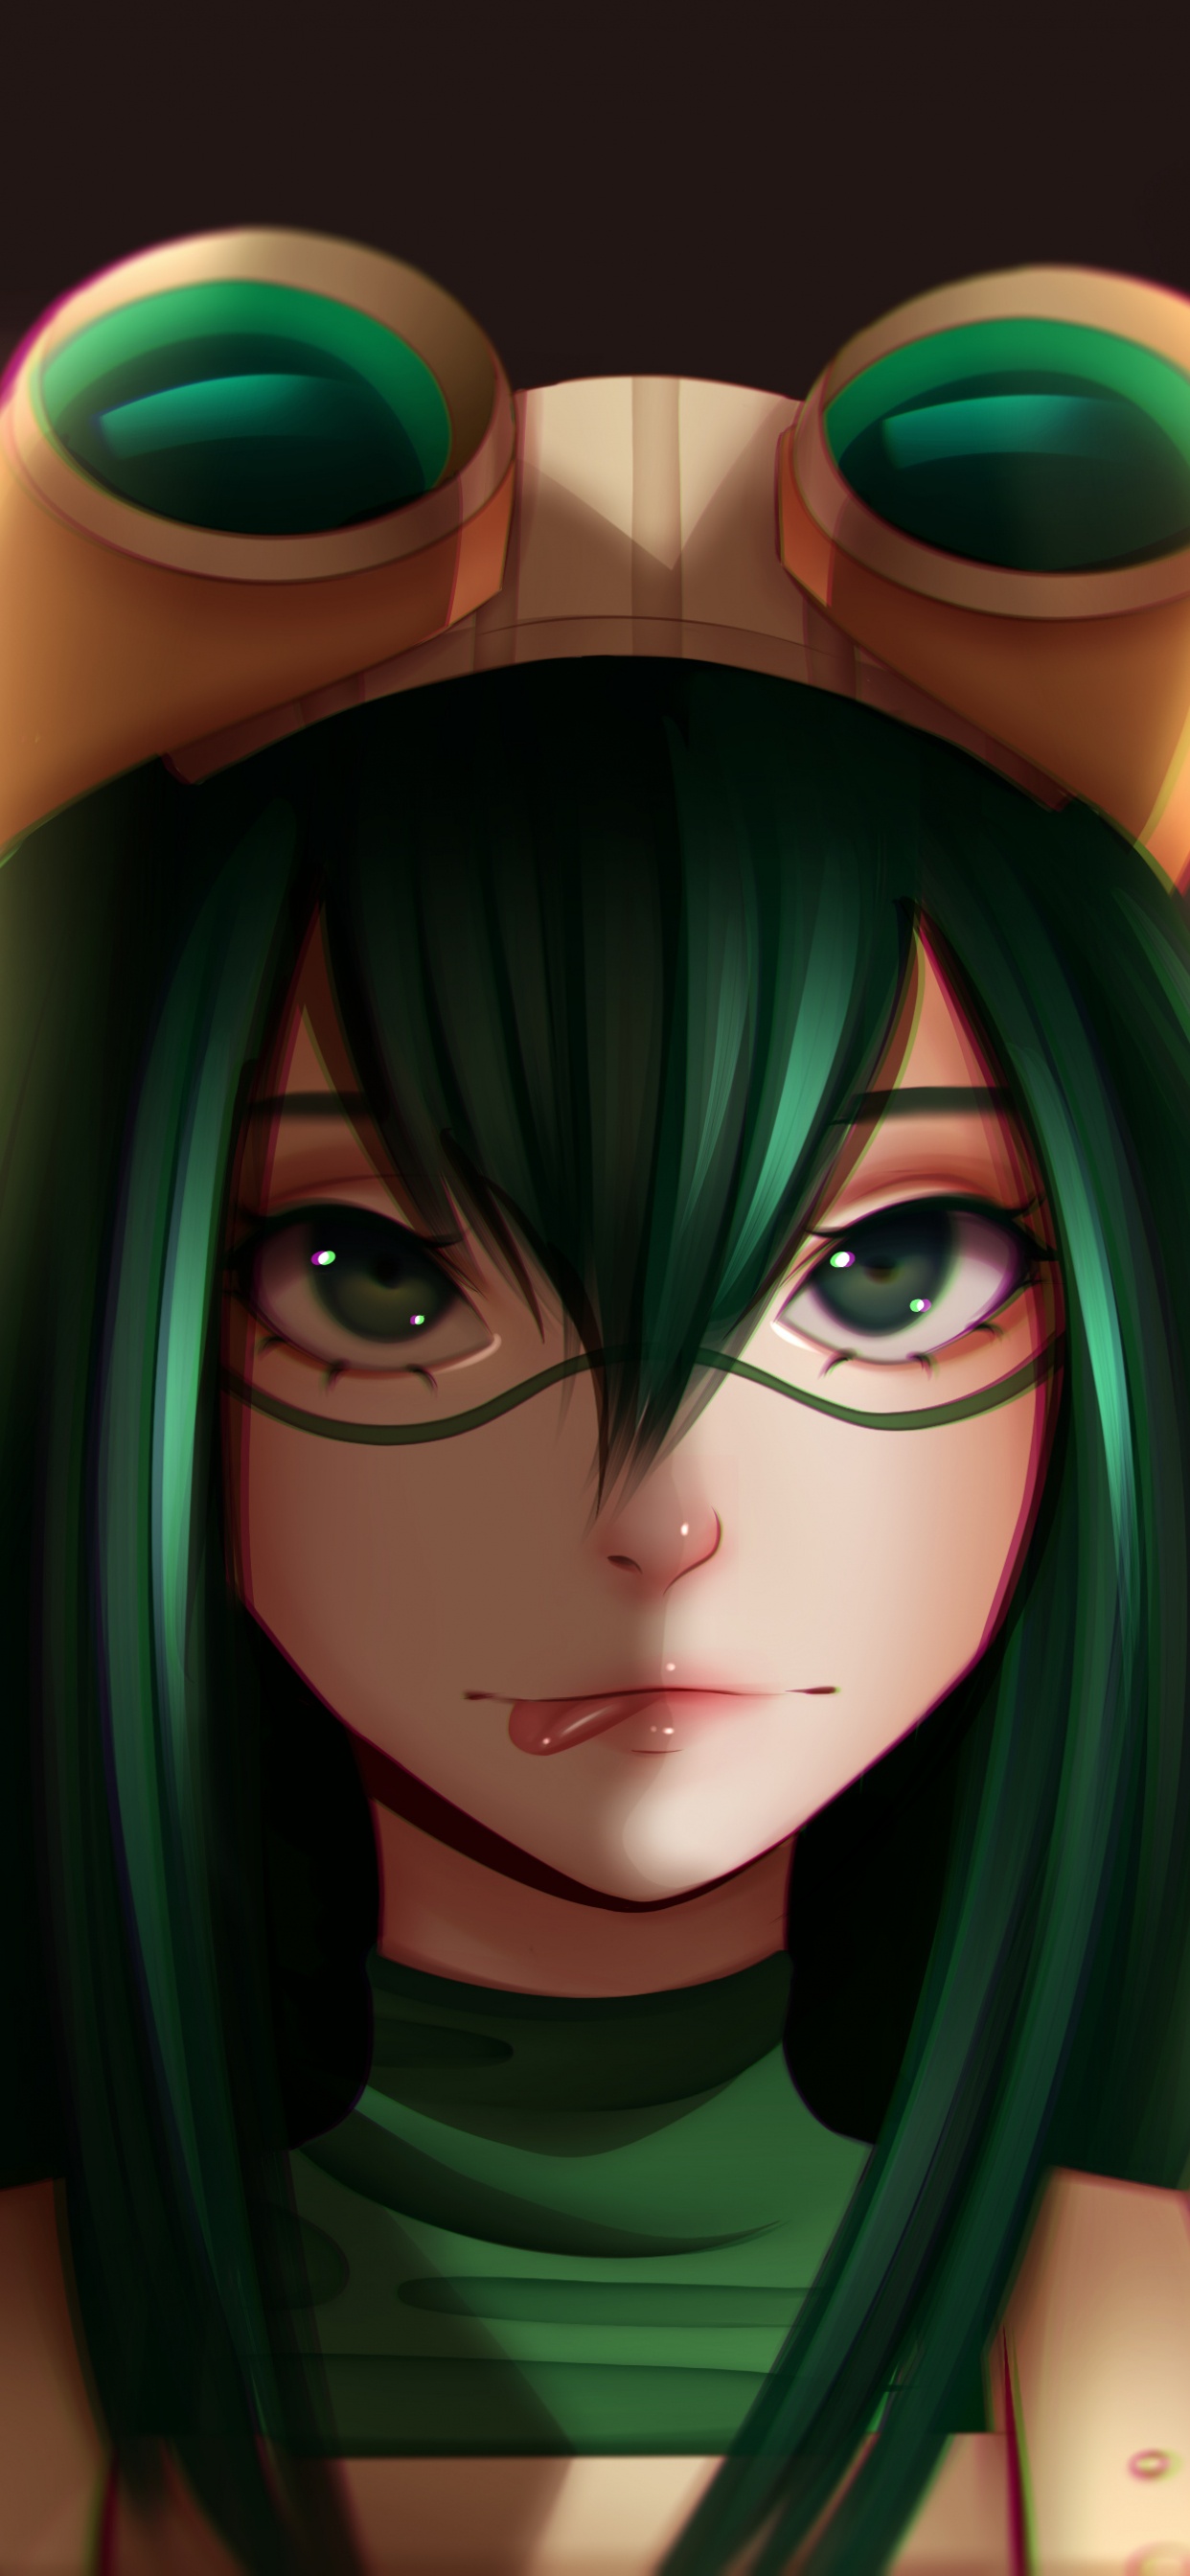 Green Haired Female Anime Character. Wallpaper in 1242x2688 Resolution